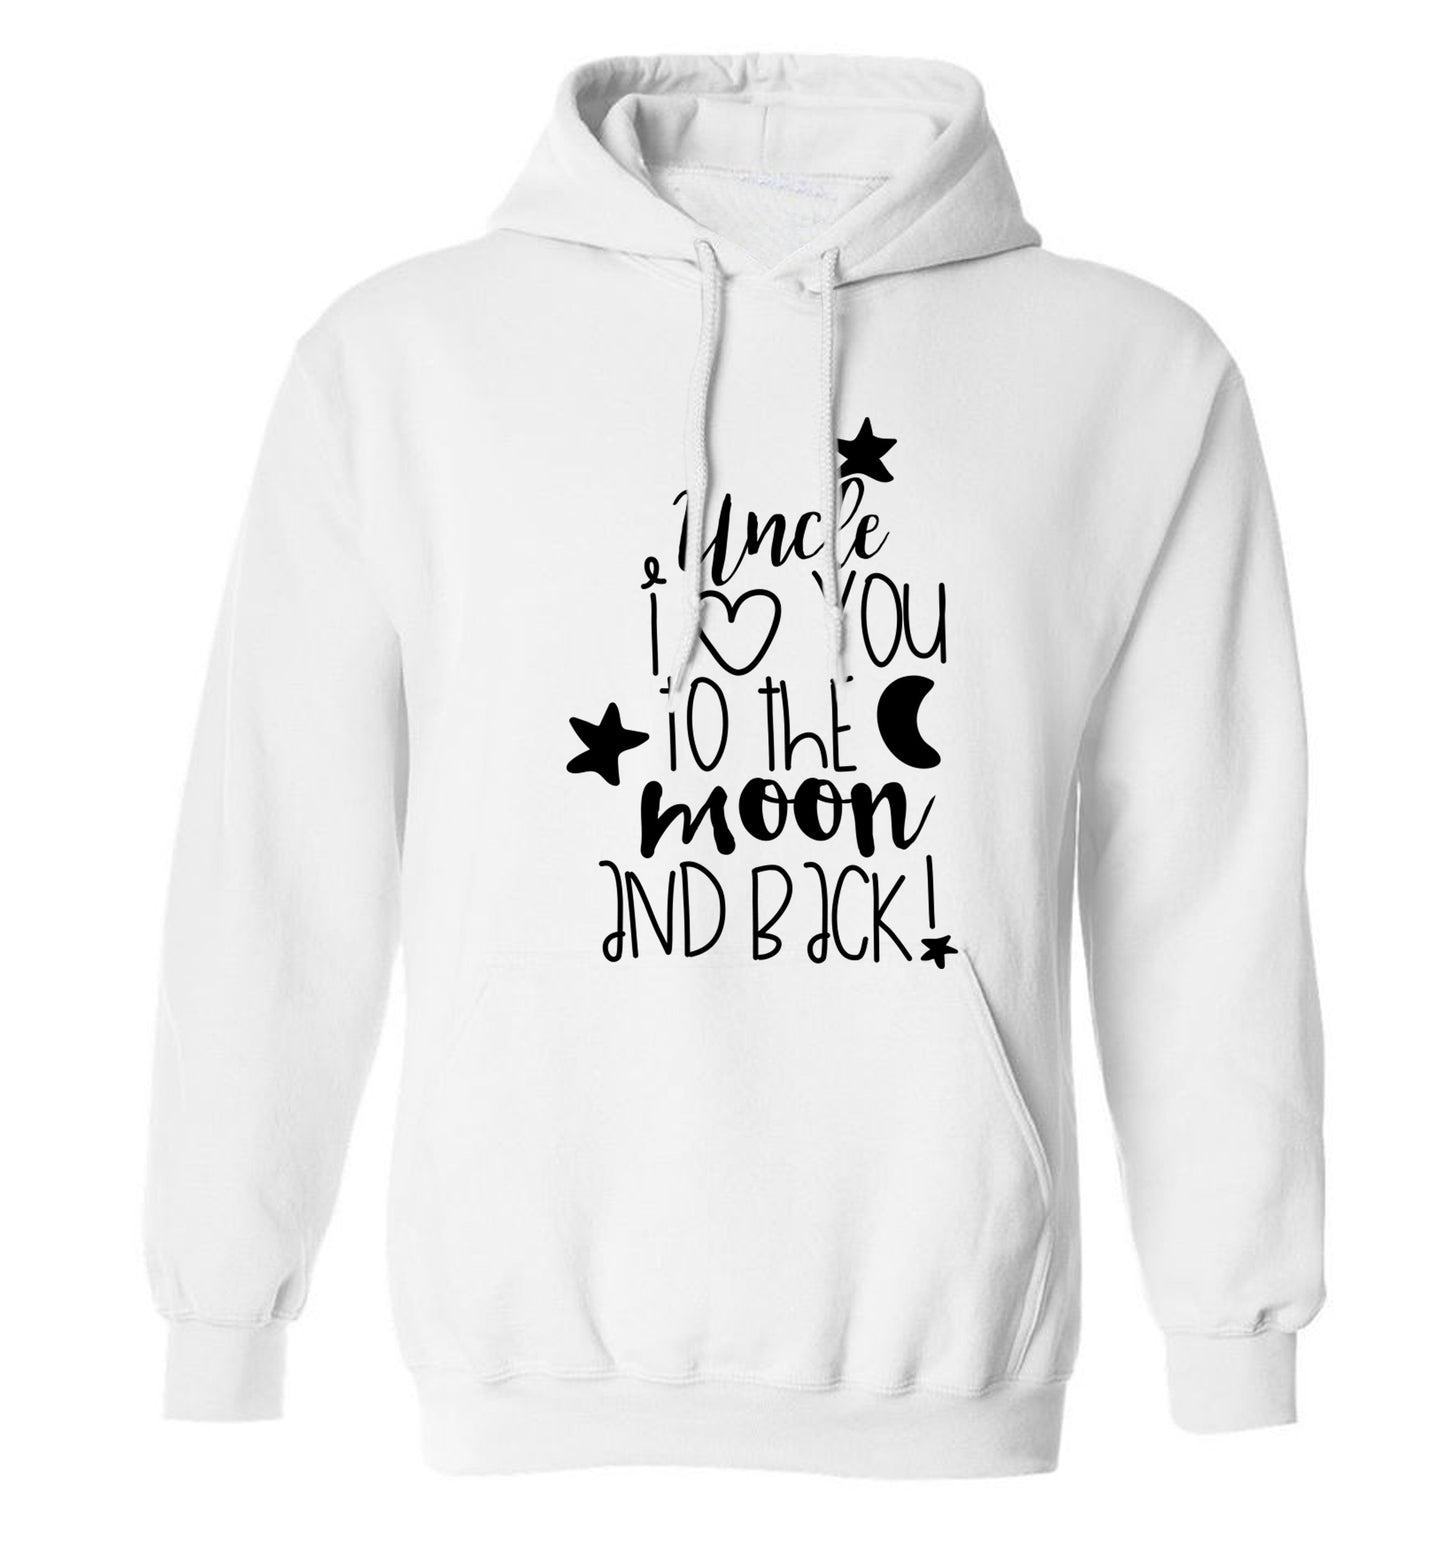 Uncle I love you to the moon and back adults unisex white hoodie 2XL